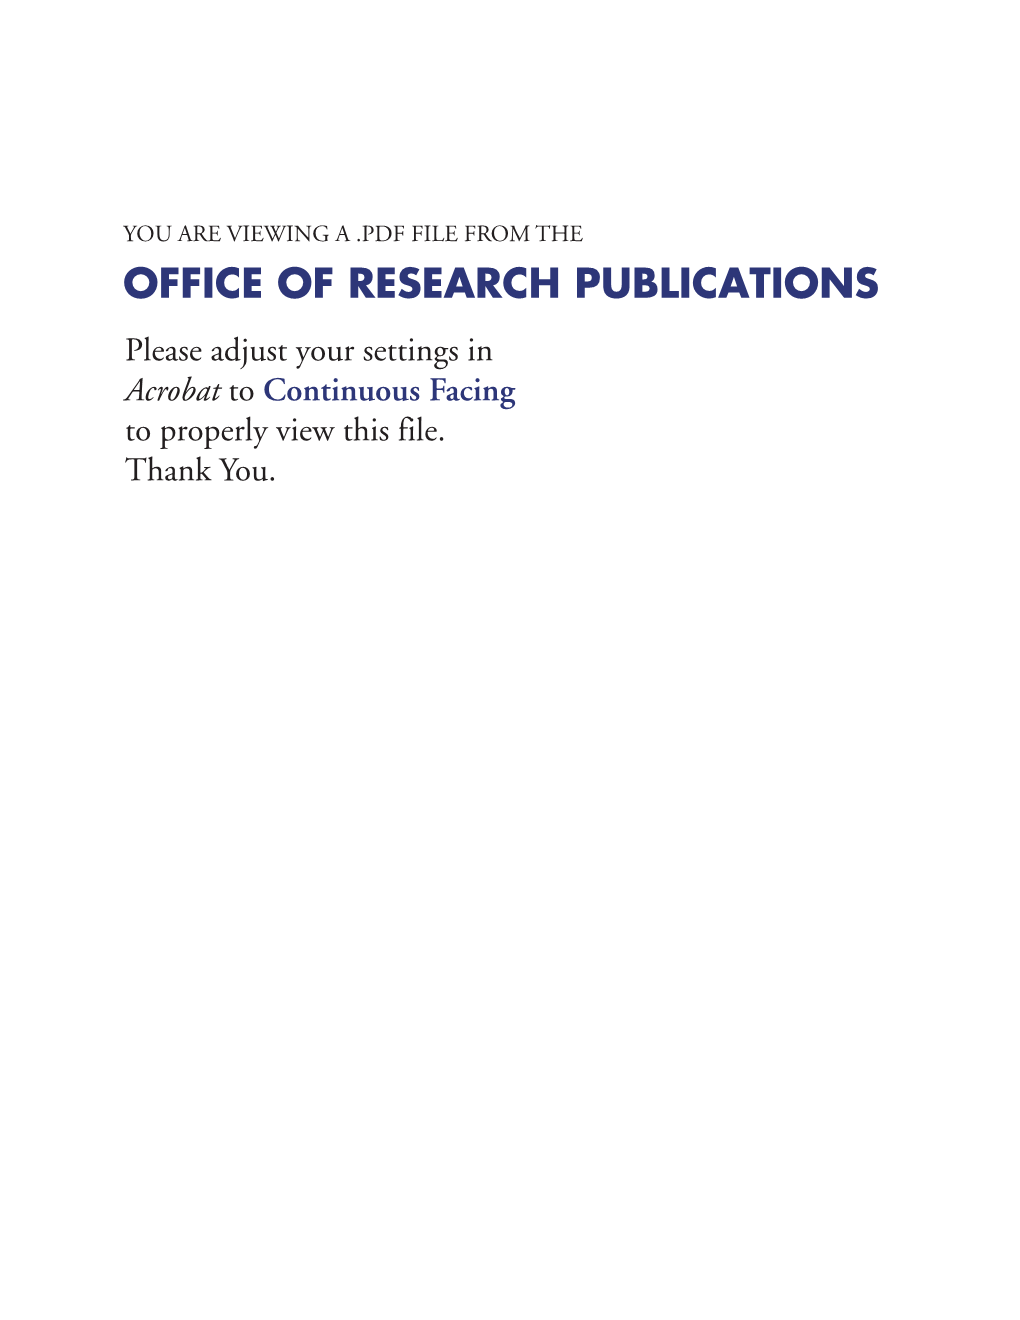 OFFICE of RESEARCH PUBLICATIONS Please Adjust Your Settings in Acrobat to Continuous Facing to Properly View This File